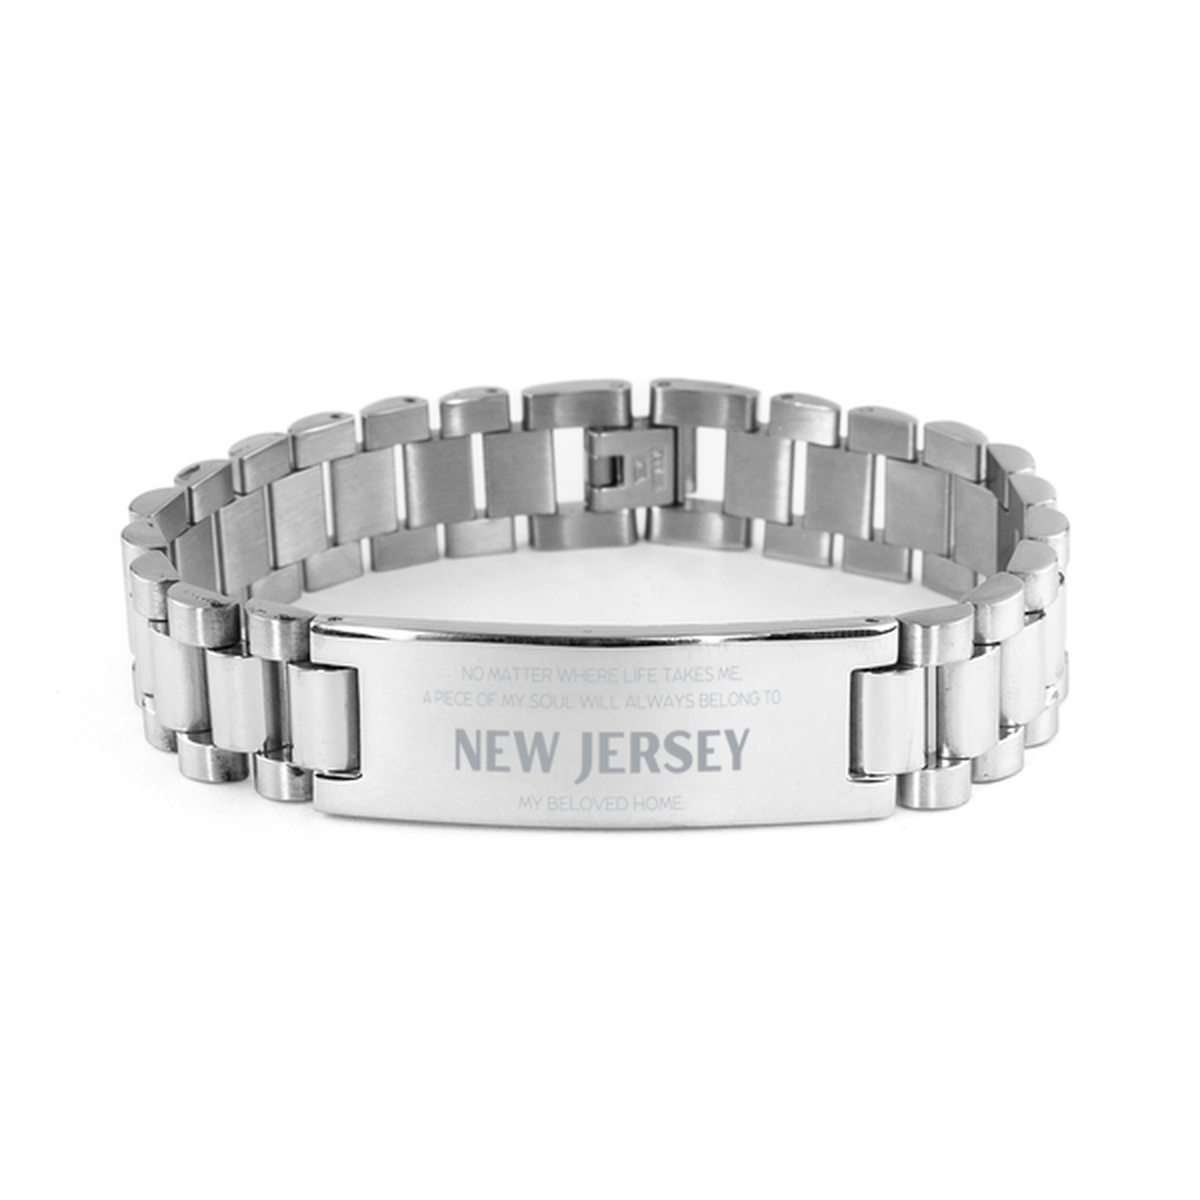 Love New Jersey State Gifts, My soul will always belong to New Jersey, Proud Ladder Stainless Steel Bracelet, Birthday Unique Gifts For New Jersey Men, Women, Friends